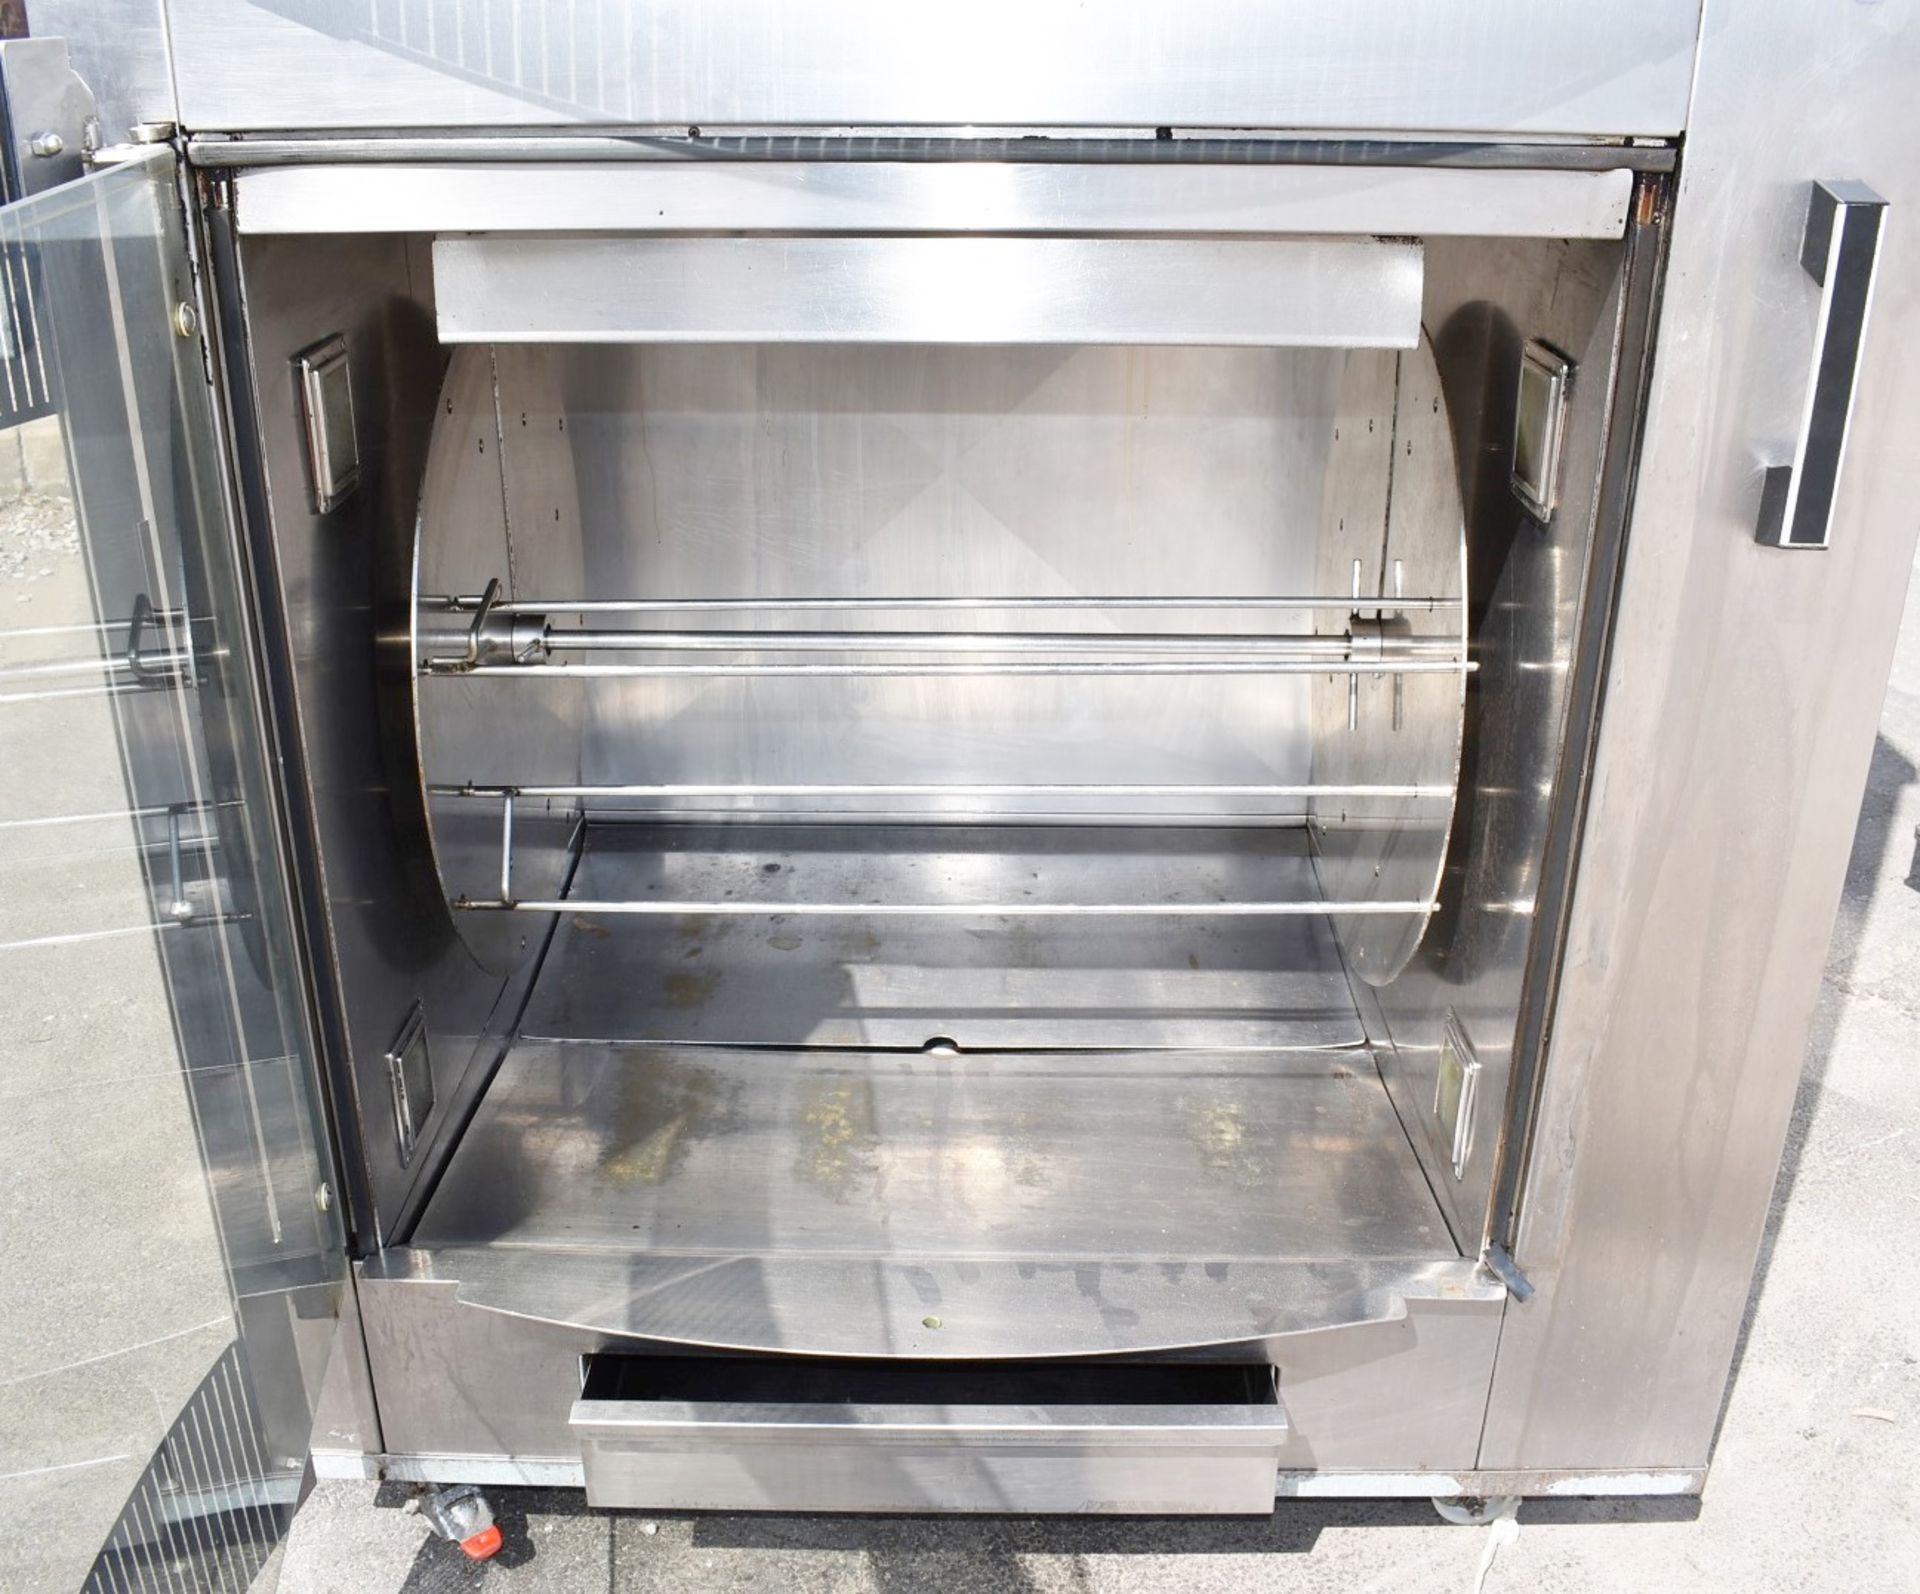 1 x BKI BBQ King Commercial Double Rotisserie Chicken Oven With Stand - Type VGUK16 - 3 Phase - Image 14 of 21